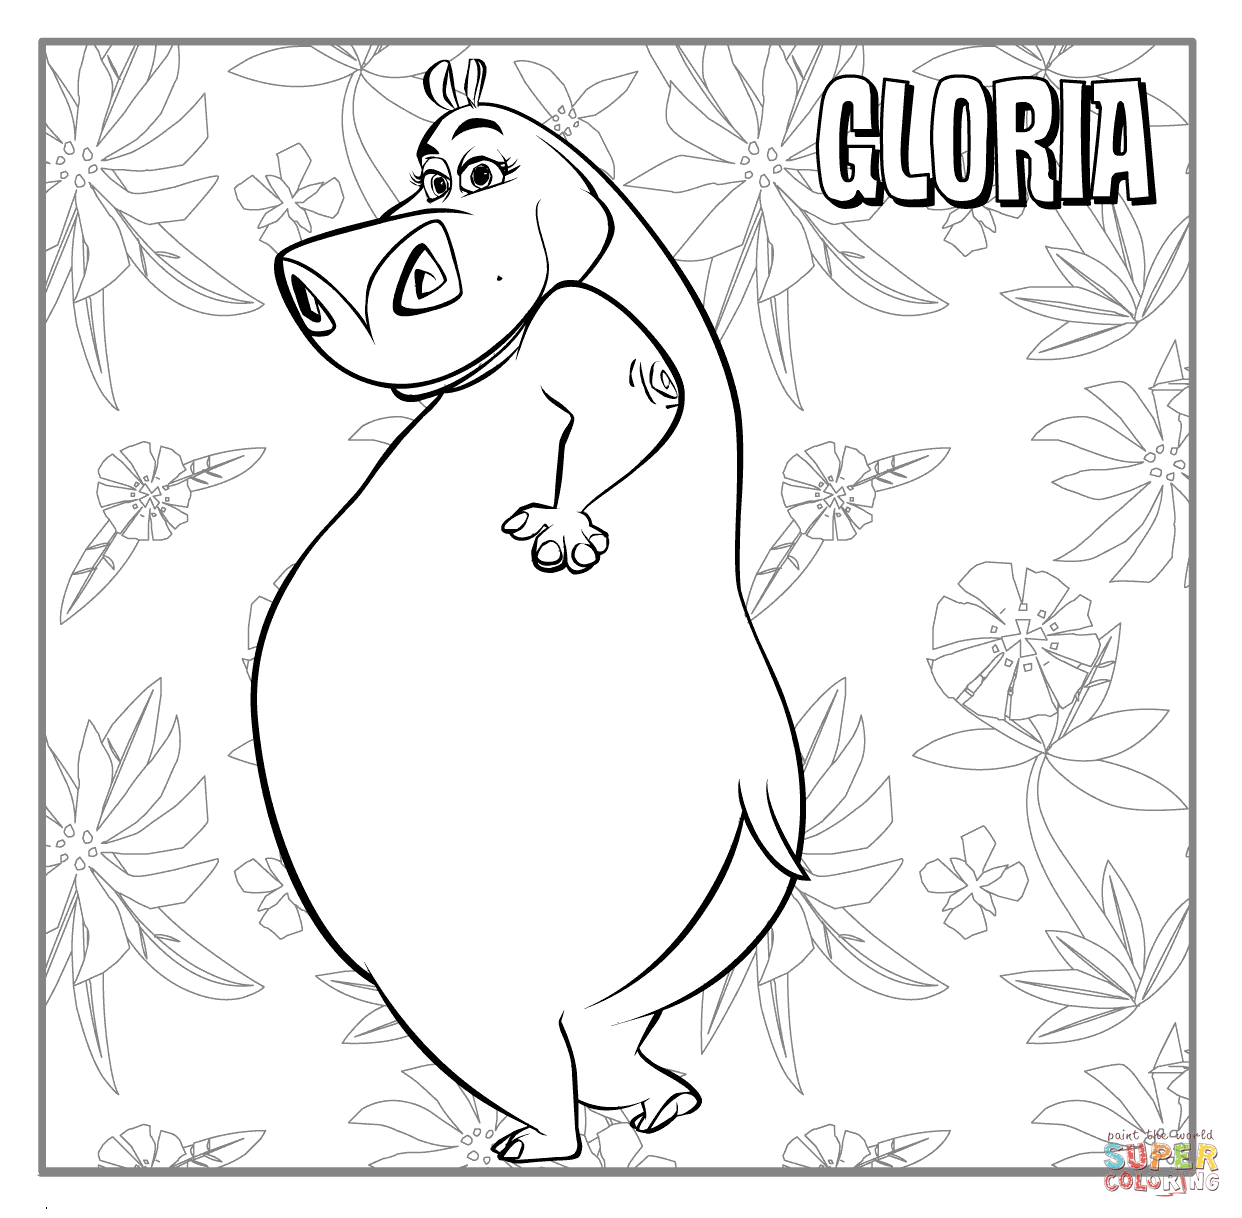 Gloria And Melman coloring page | Free Printable Coloring Pages